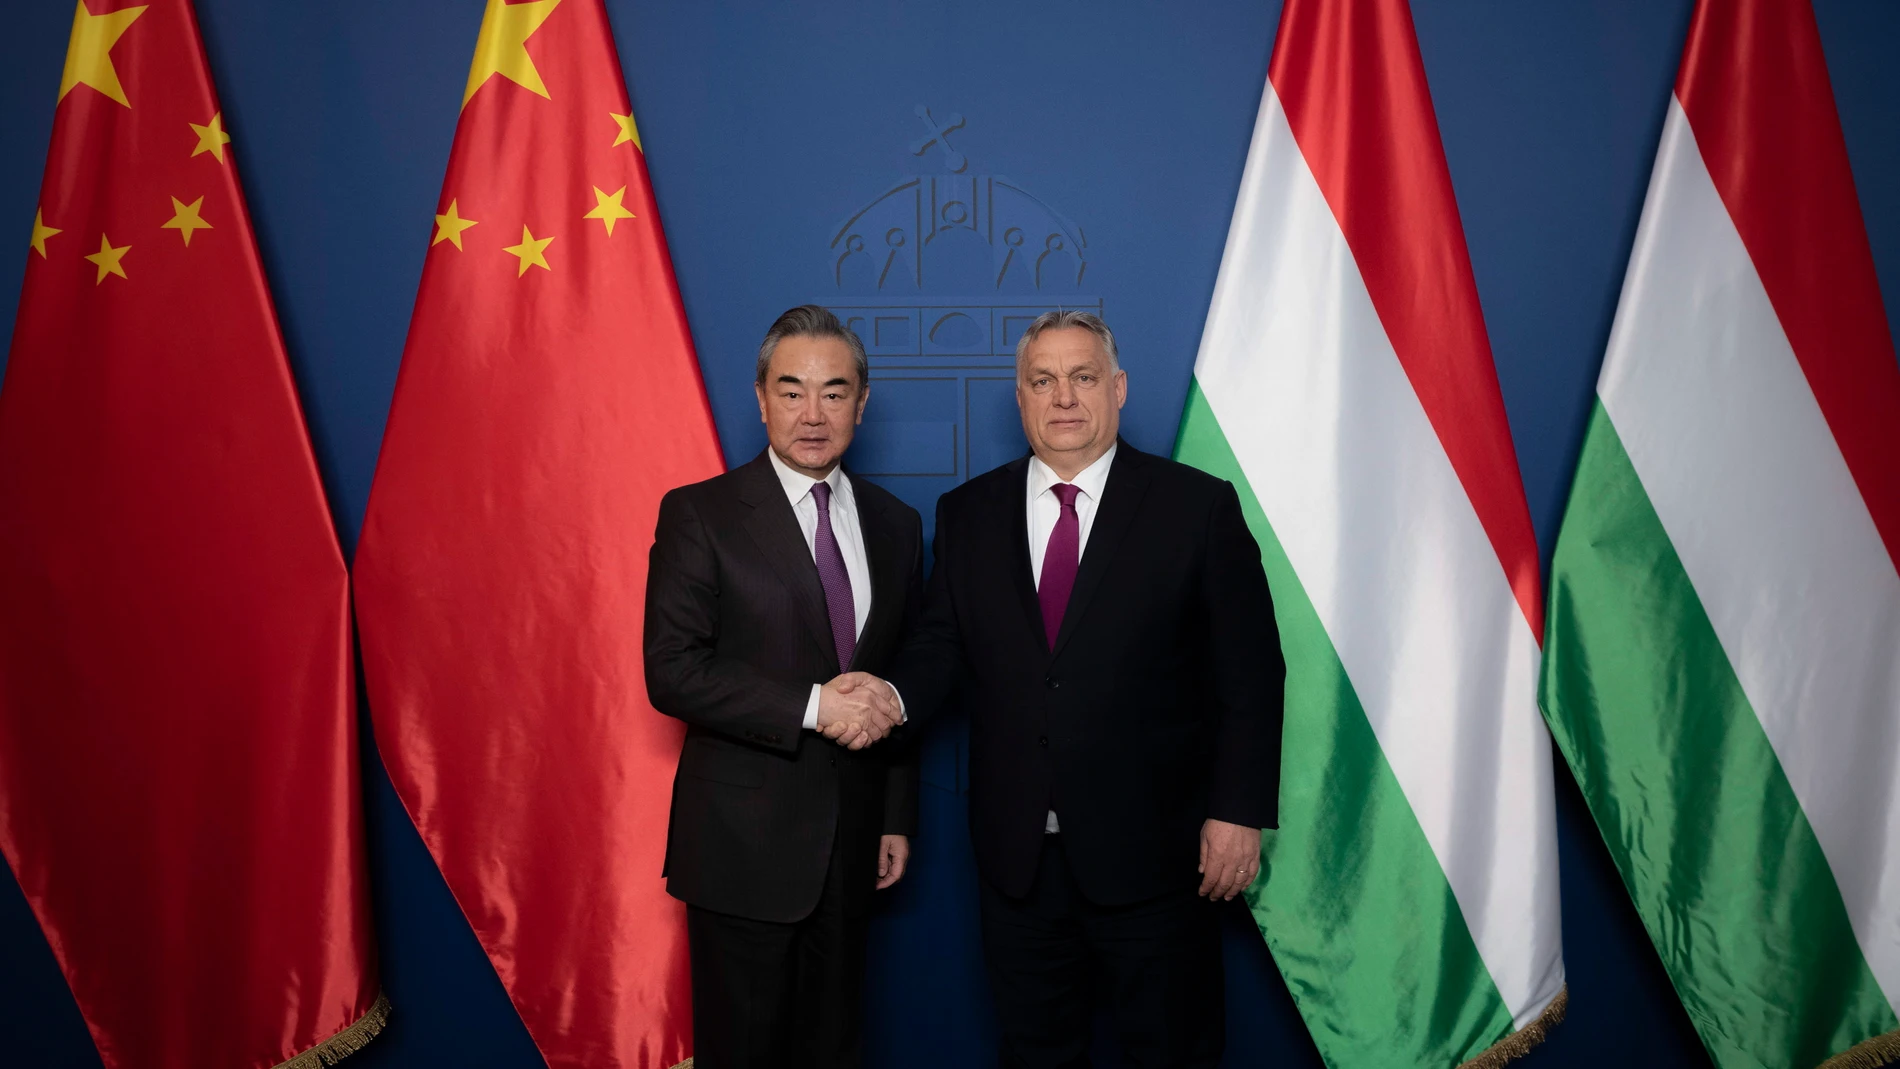 Budapest (Hungary), 19/02/2023.- A handout photo made available by the Hungarian Prime Minister's press office shows Hungarian Prime Minister Viktor Orban (R) receiving China's Director of the Office of the Central Foreign Affairs Commission Wang Yi in his office in Budapest, Hungary, 19 February 2023. (Hungría) EFE/EPA/BENKO VIVIEN CHER/HUNGARIAN PRIME MINISTER'S PO/HANDOUT HUNGARY OUT HANDOUT EDITORIAL USE ONLY/NO SALES 